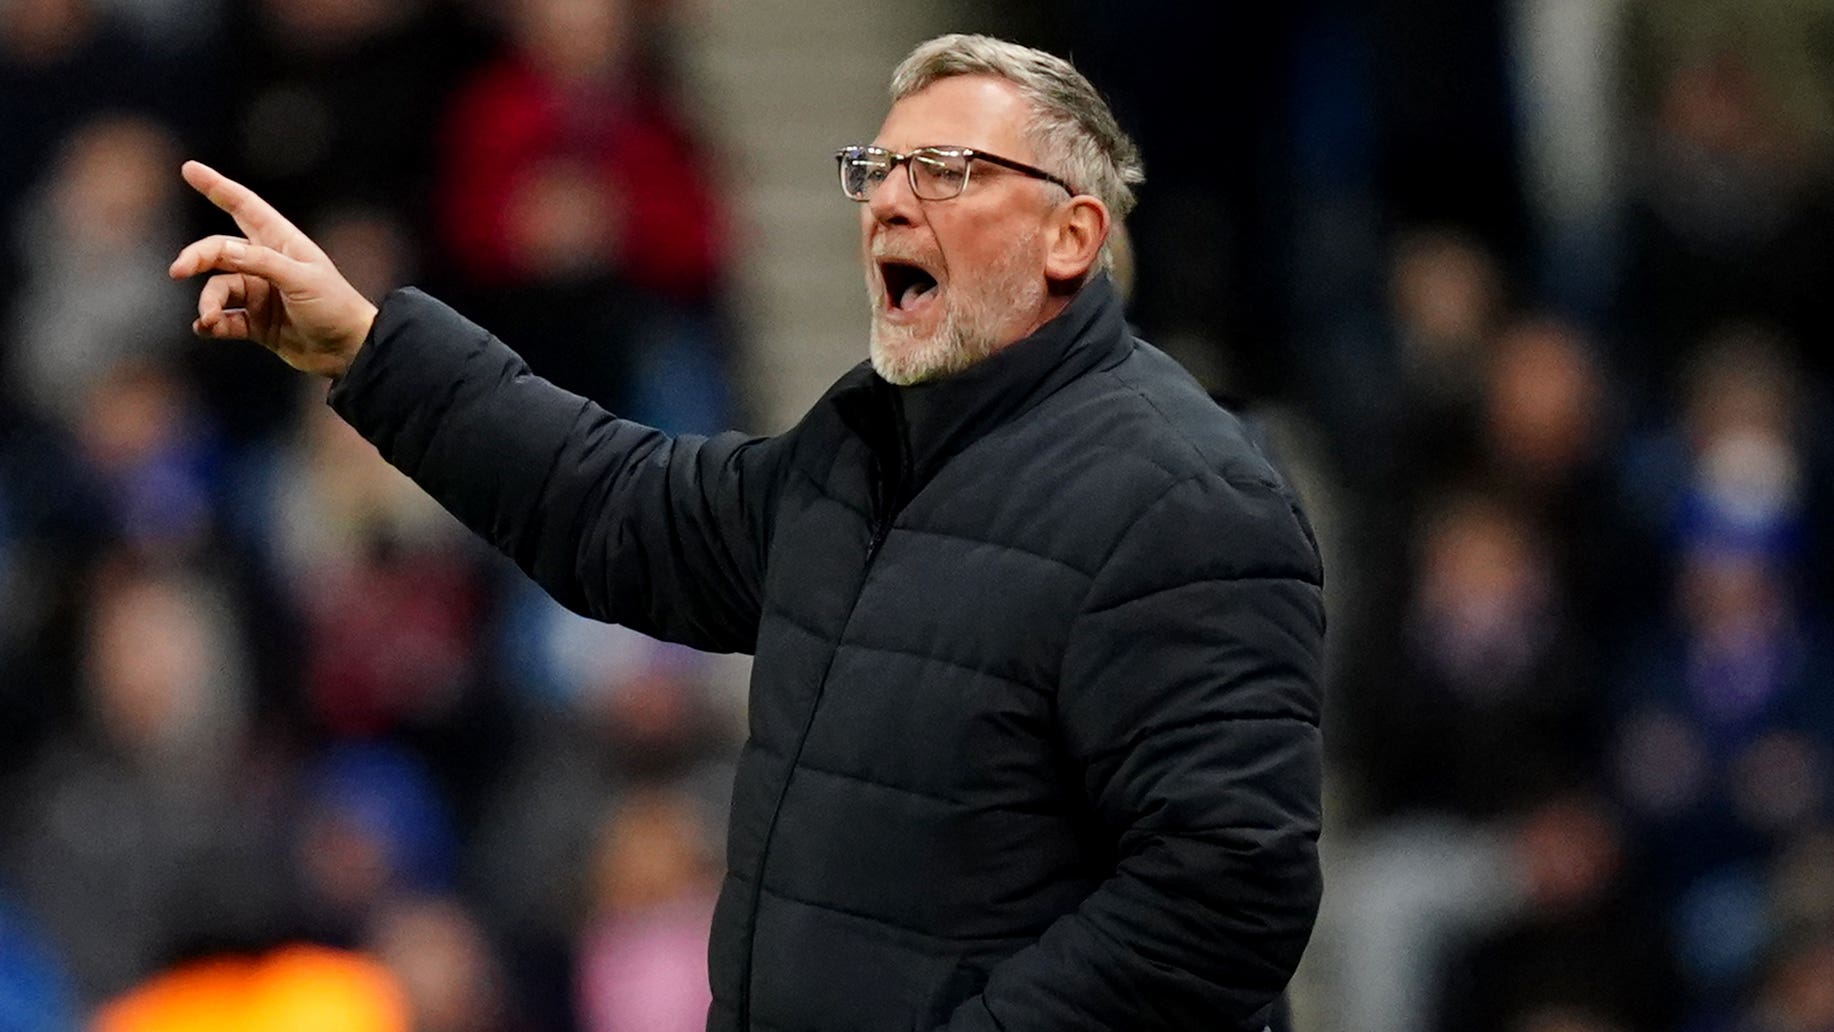 St Johnstone’s ability to grind out result pleases boss Craig Levein